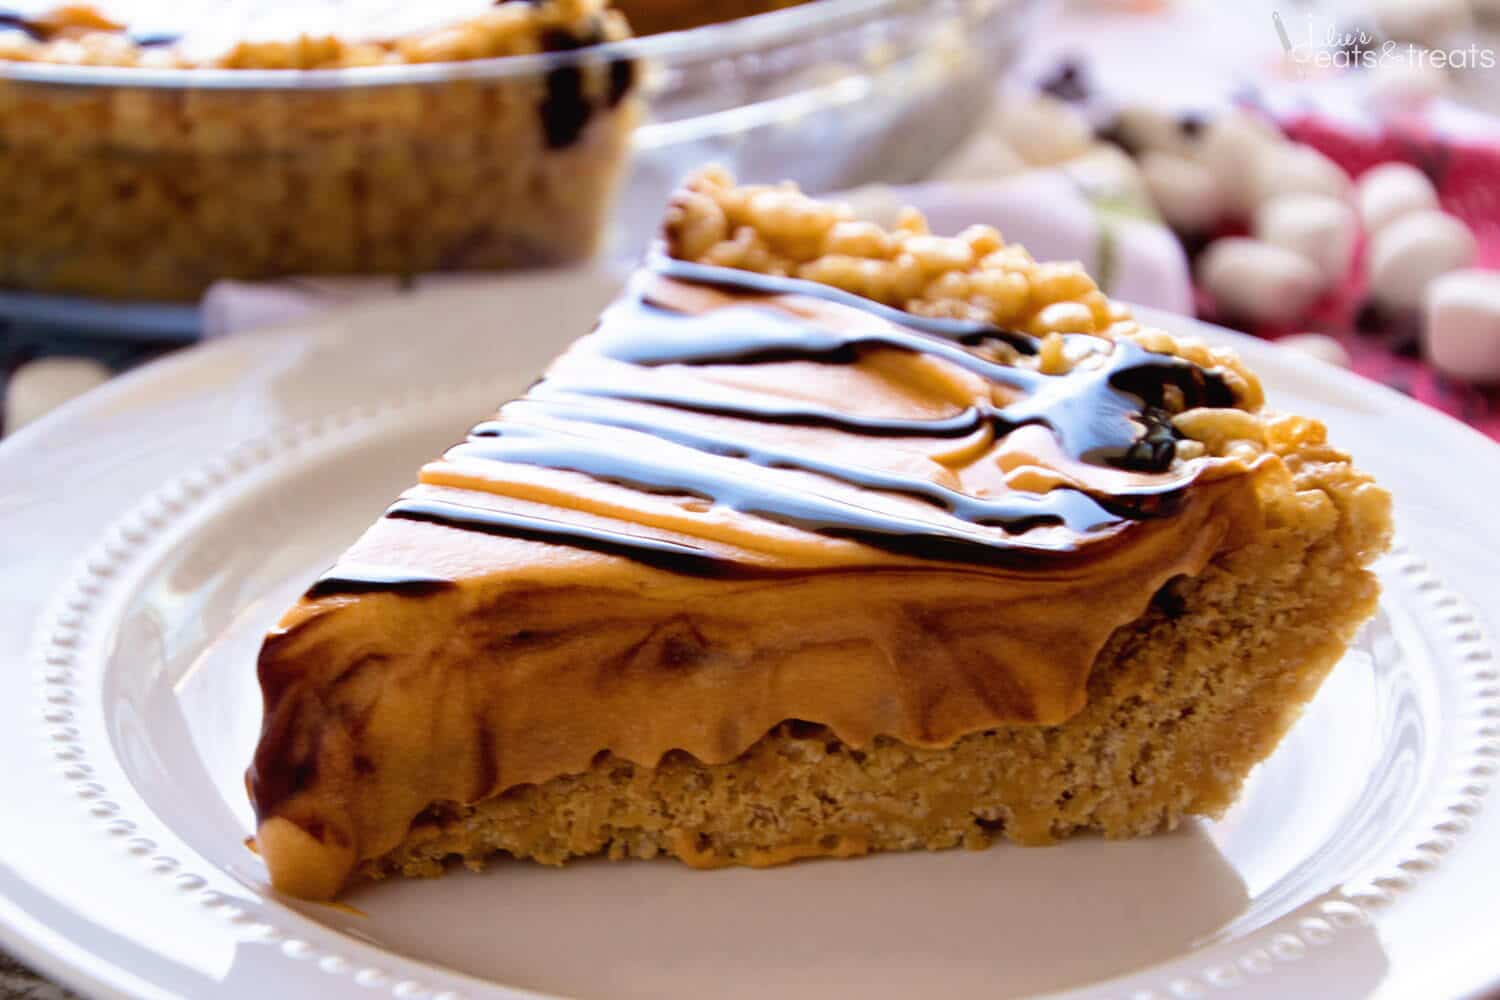 No Bake Scotcheroo Pie Recipe ~ A Delicious Peanut Butter Rice Krispie Pie Crust Topped with Butterscotch Pudding and Topped with Chocolate!